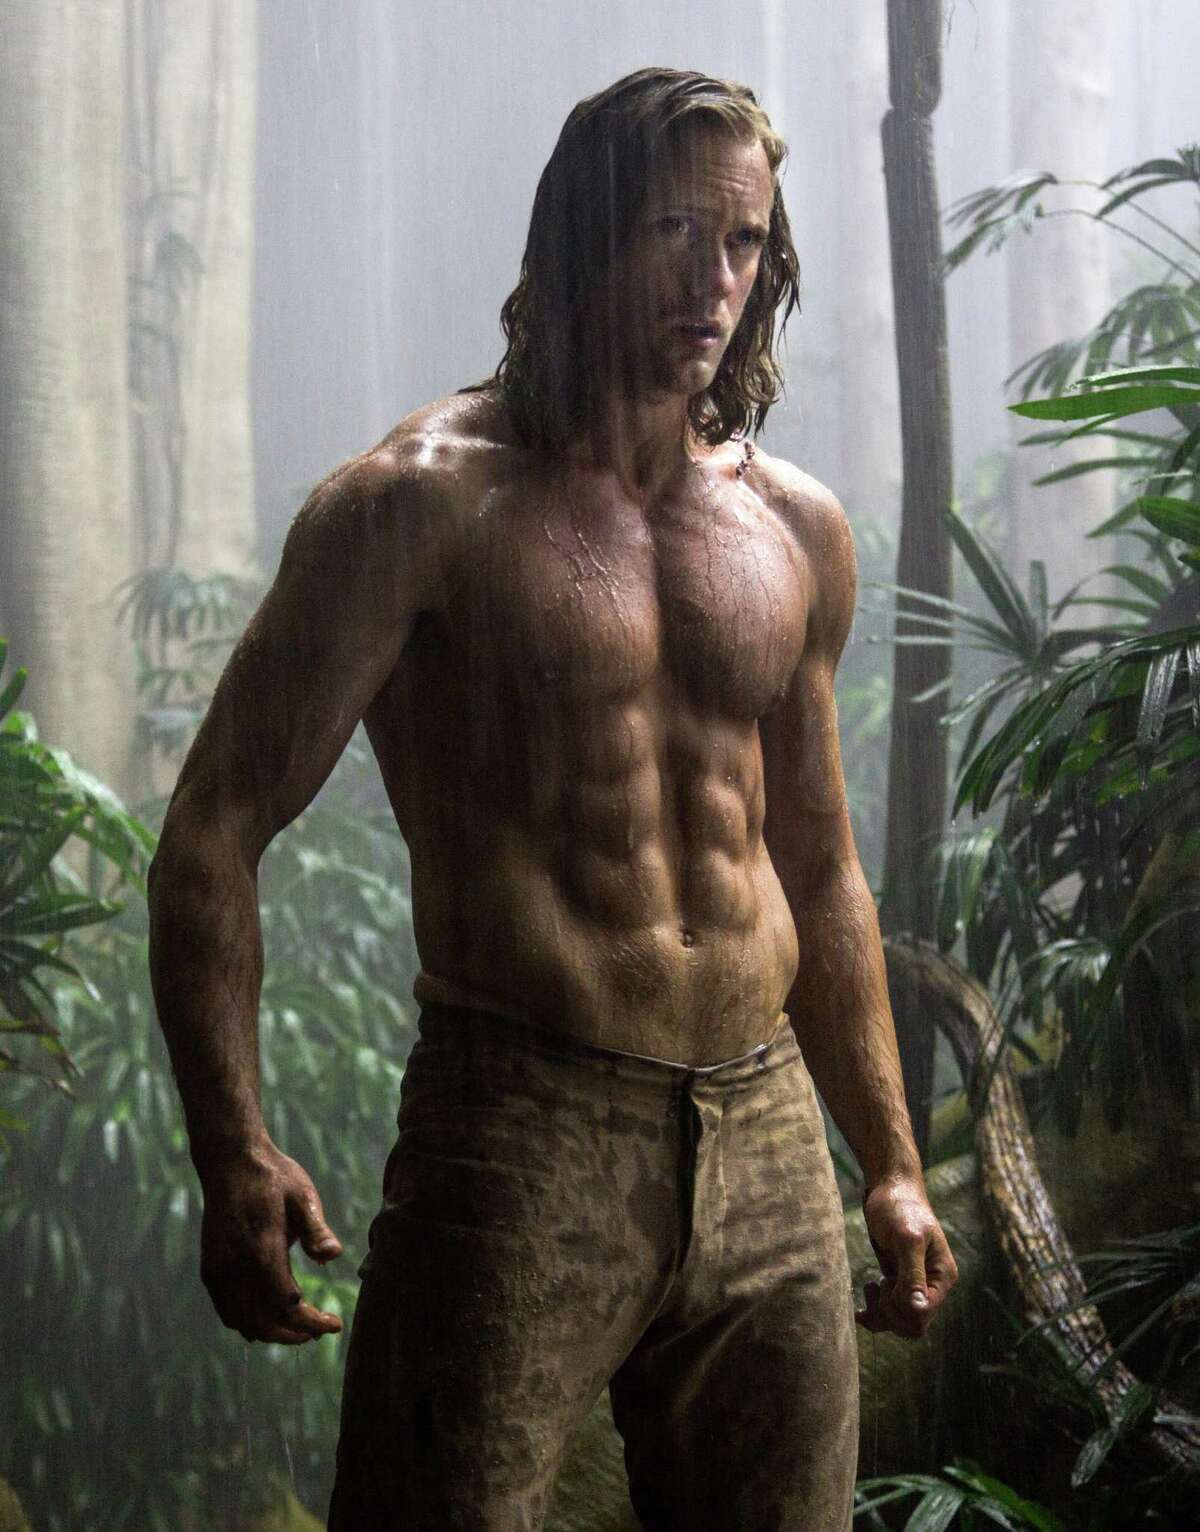 This image released by Warner Bros. Entertainment shows Alexander Skarsgard from "The Legend of Tarzan." (Jonathan Olley/Warner Bros. Entertainment via AP)